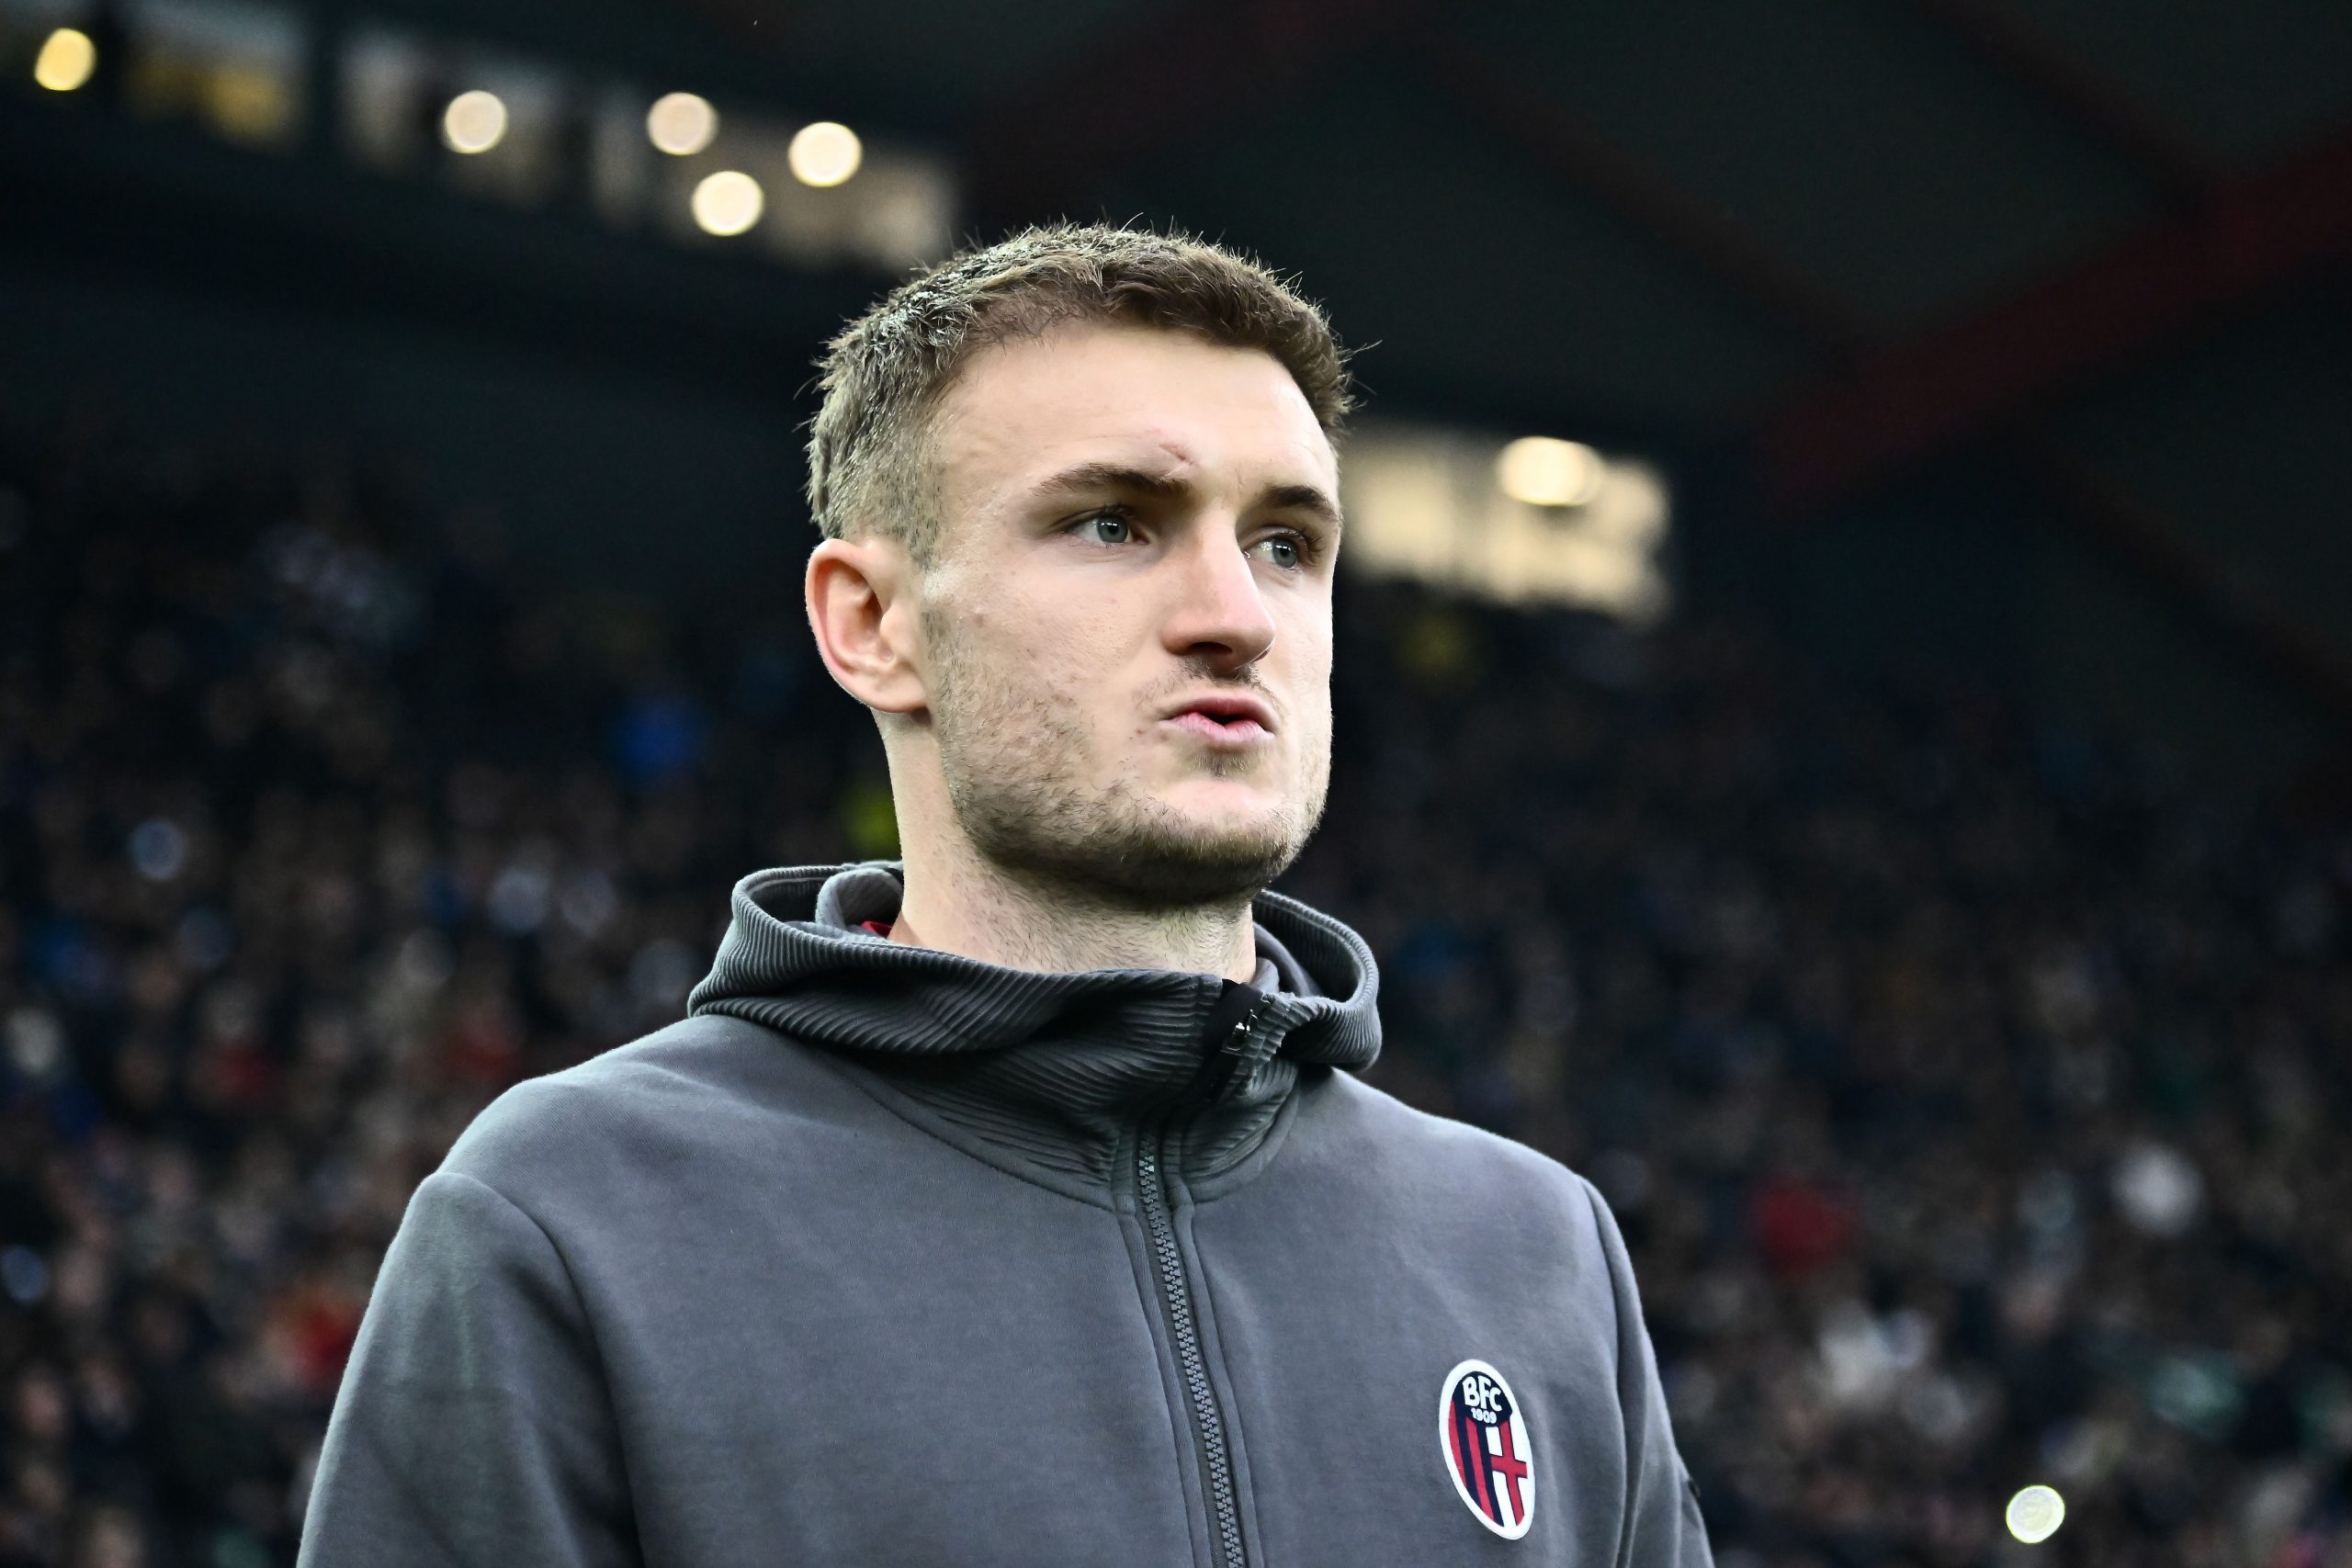 Stefan Posch of Bologna FC looks on during the Serie A match between Udinese Calcio and Bologna FC at Dacia Arena on January 15, 2023 in Udine, Italy. (Photo by Alessandro Sabattini/Getty Images)